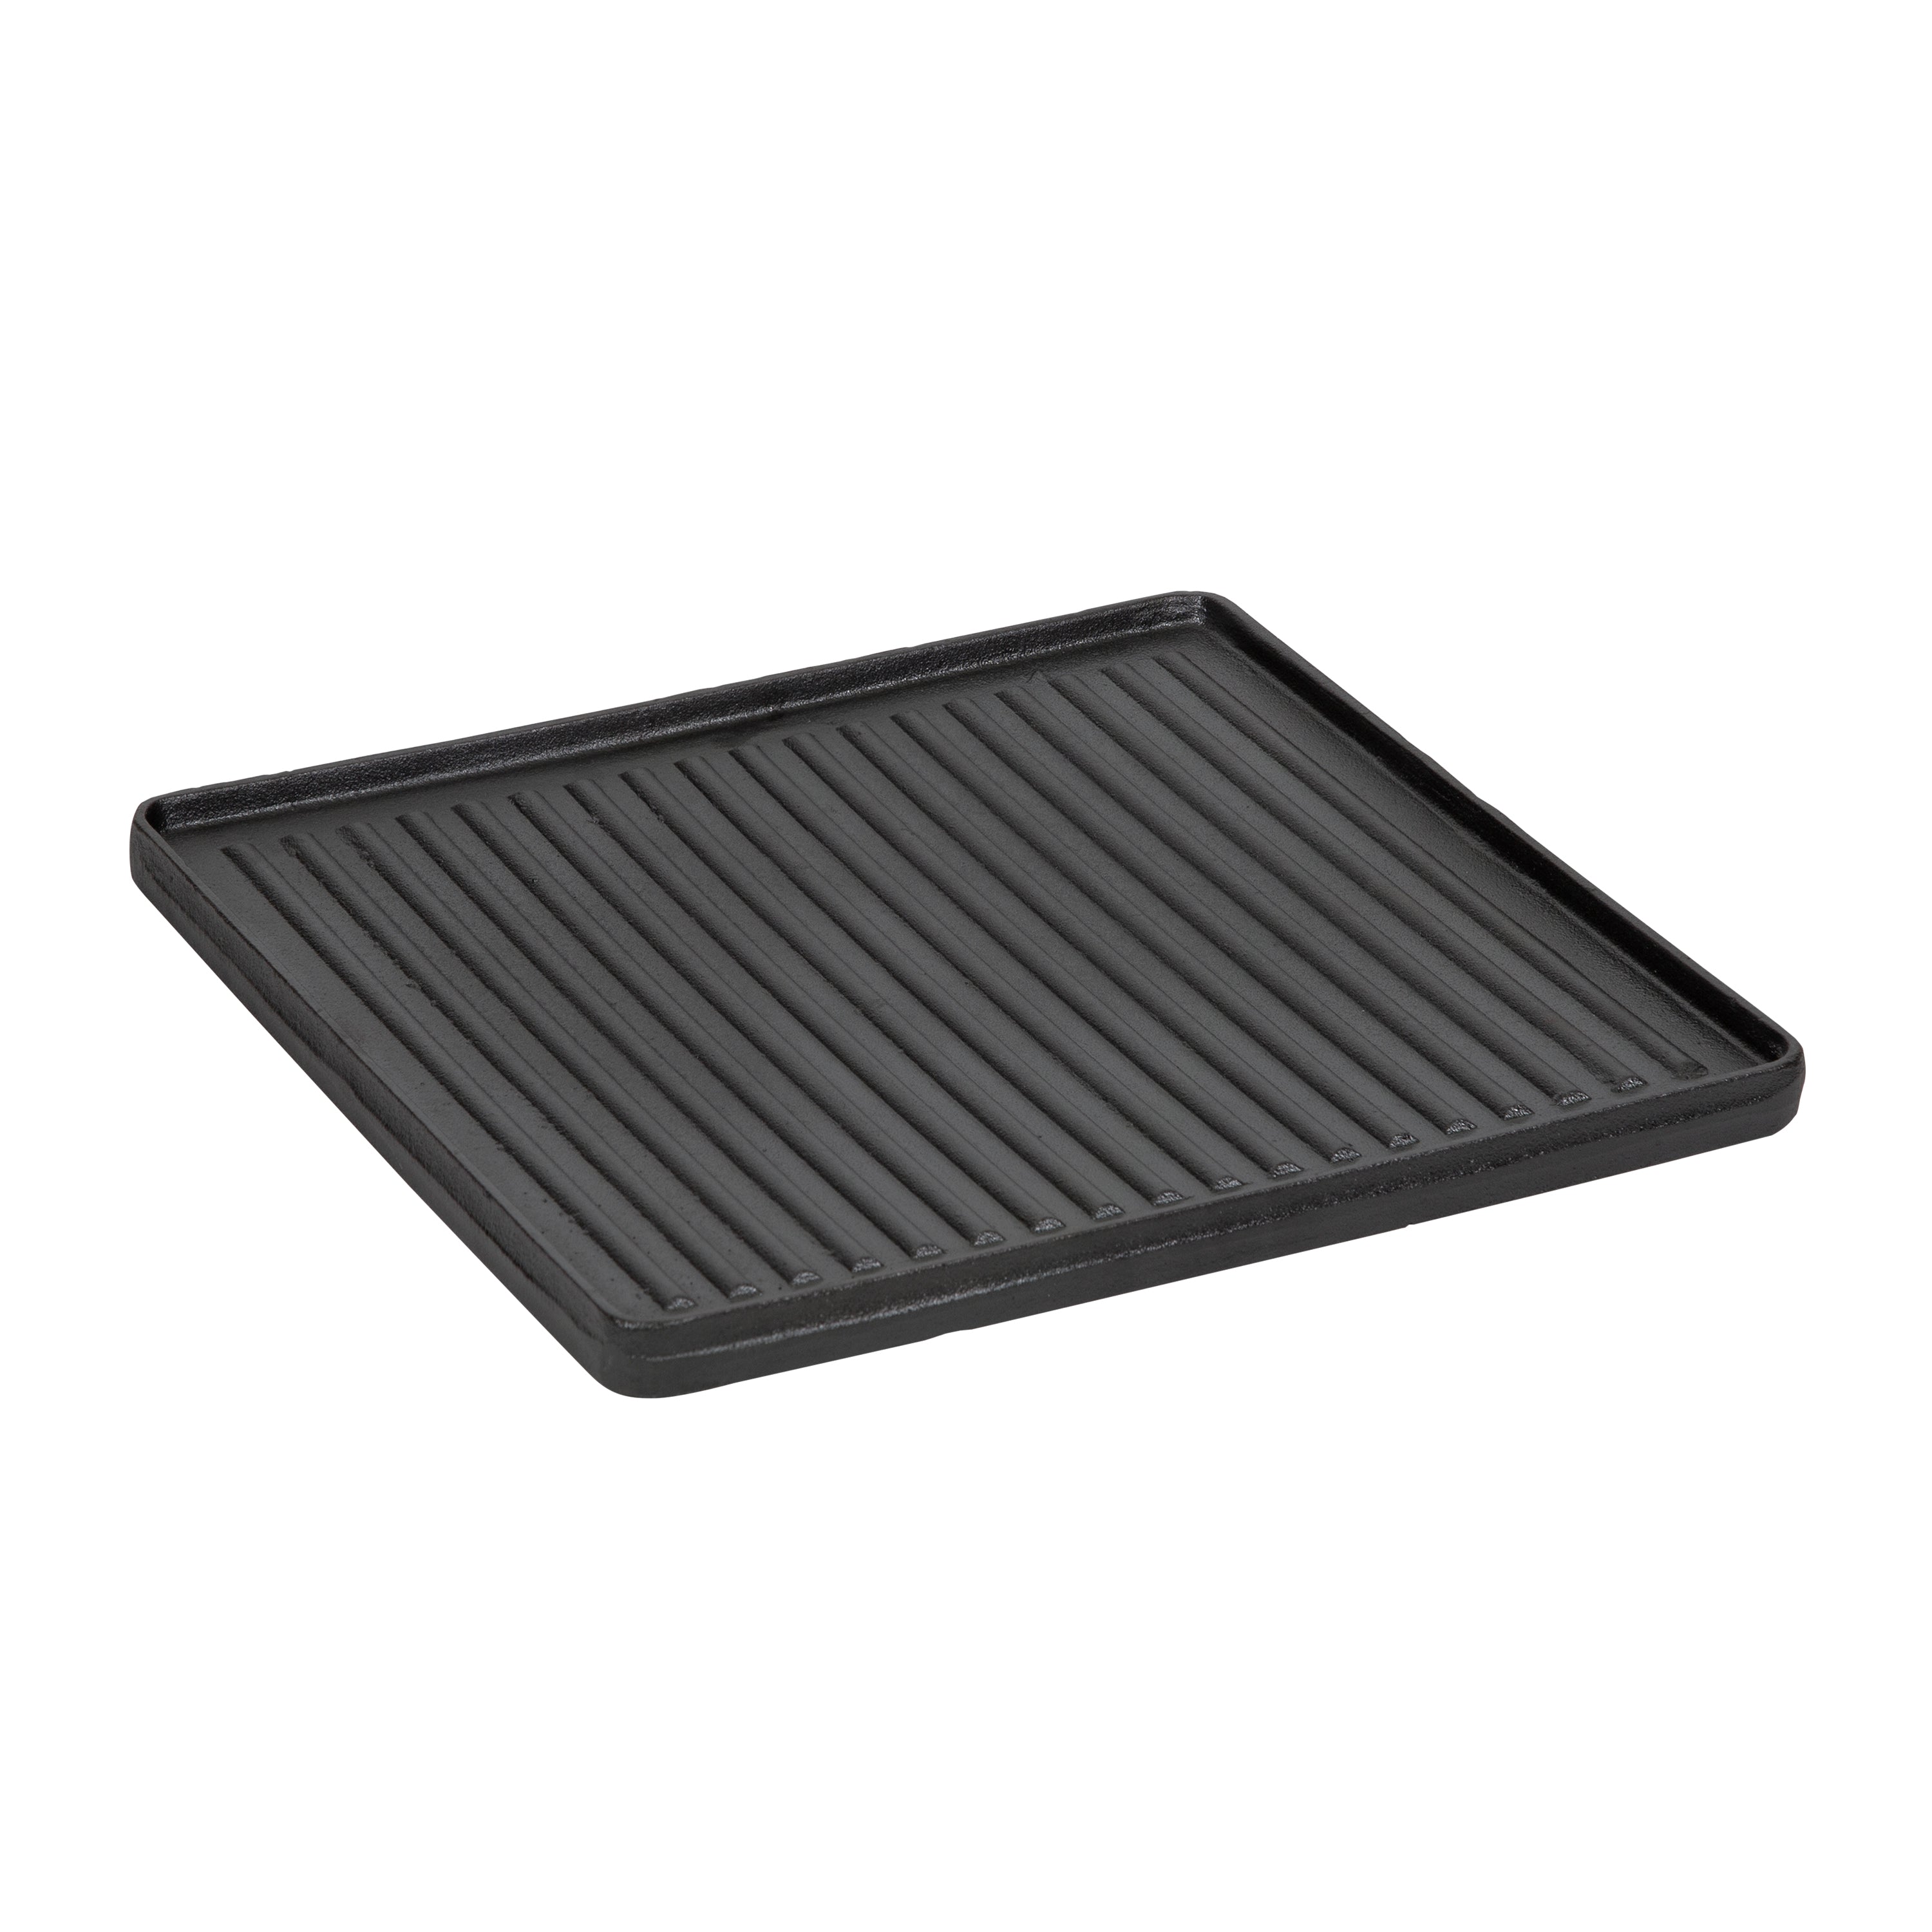 Cast Iron Griddle - 15 In X 15 In - Preseasoned Reversible Cooking Surface